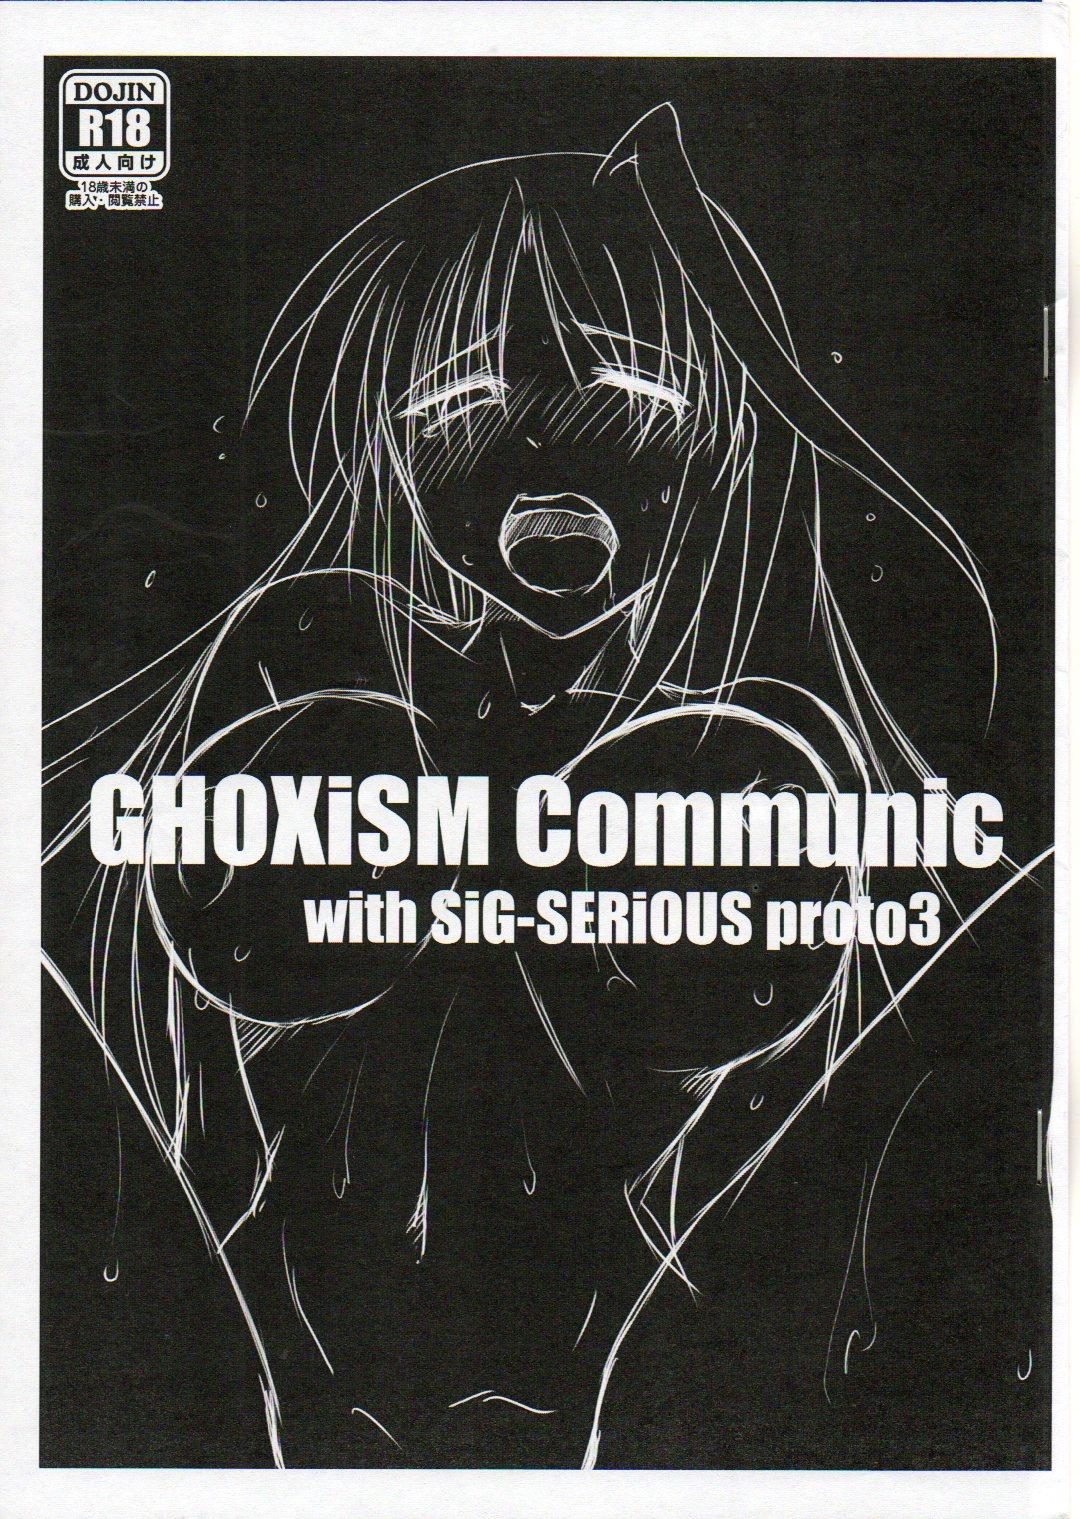 GHOXiSM Communic with Sig-SERIOUS proto 3 1